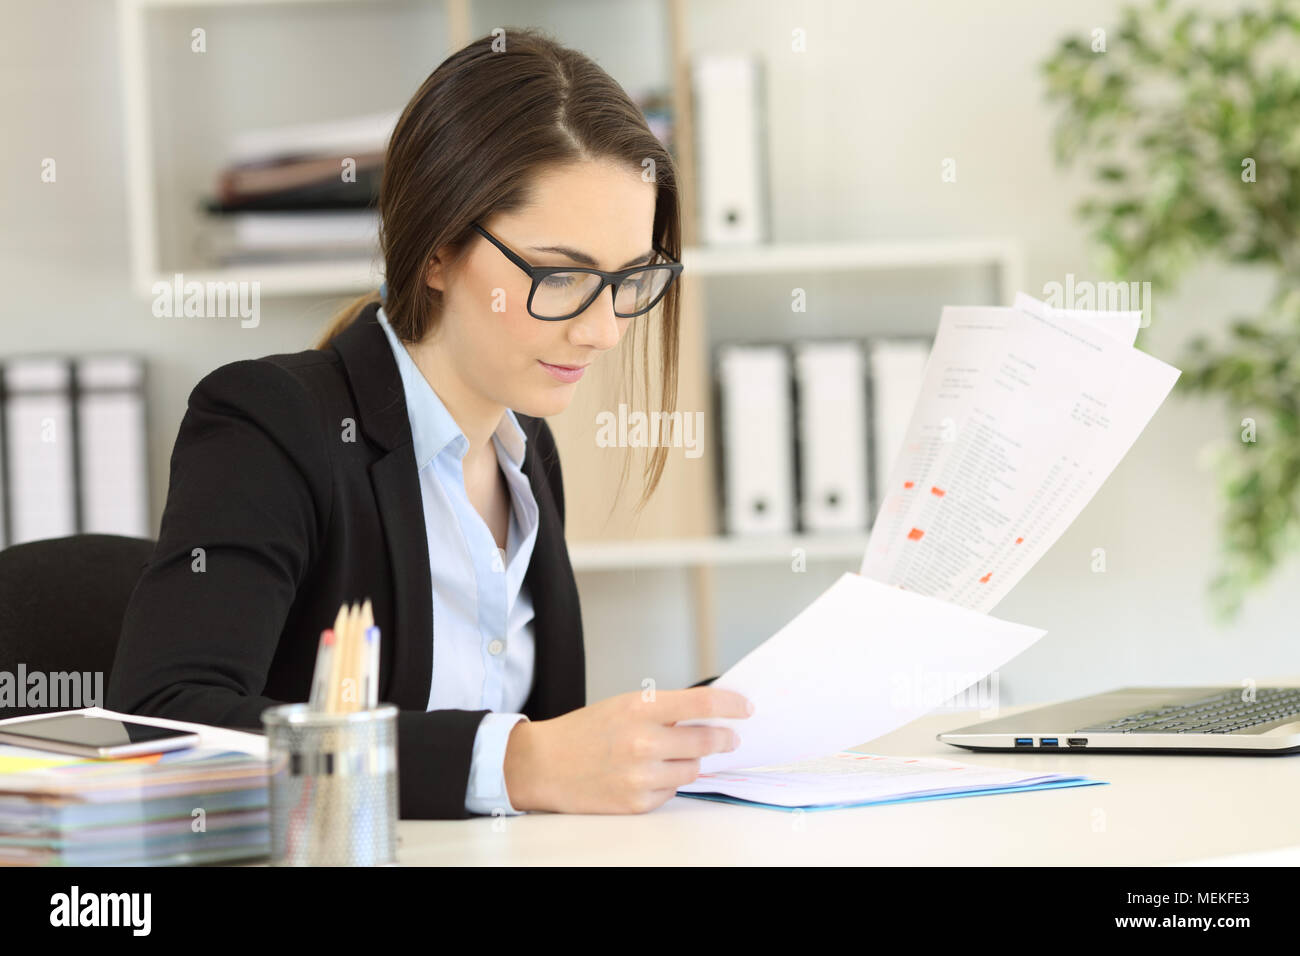 Office worker wearing eyeglasses checking paper documents Stock Photo